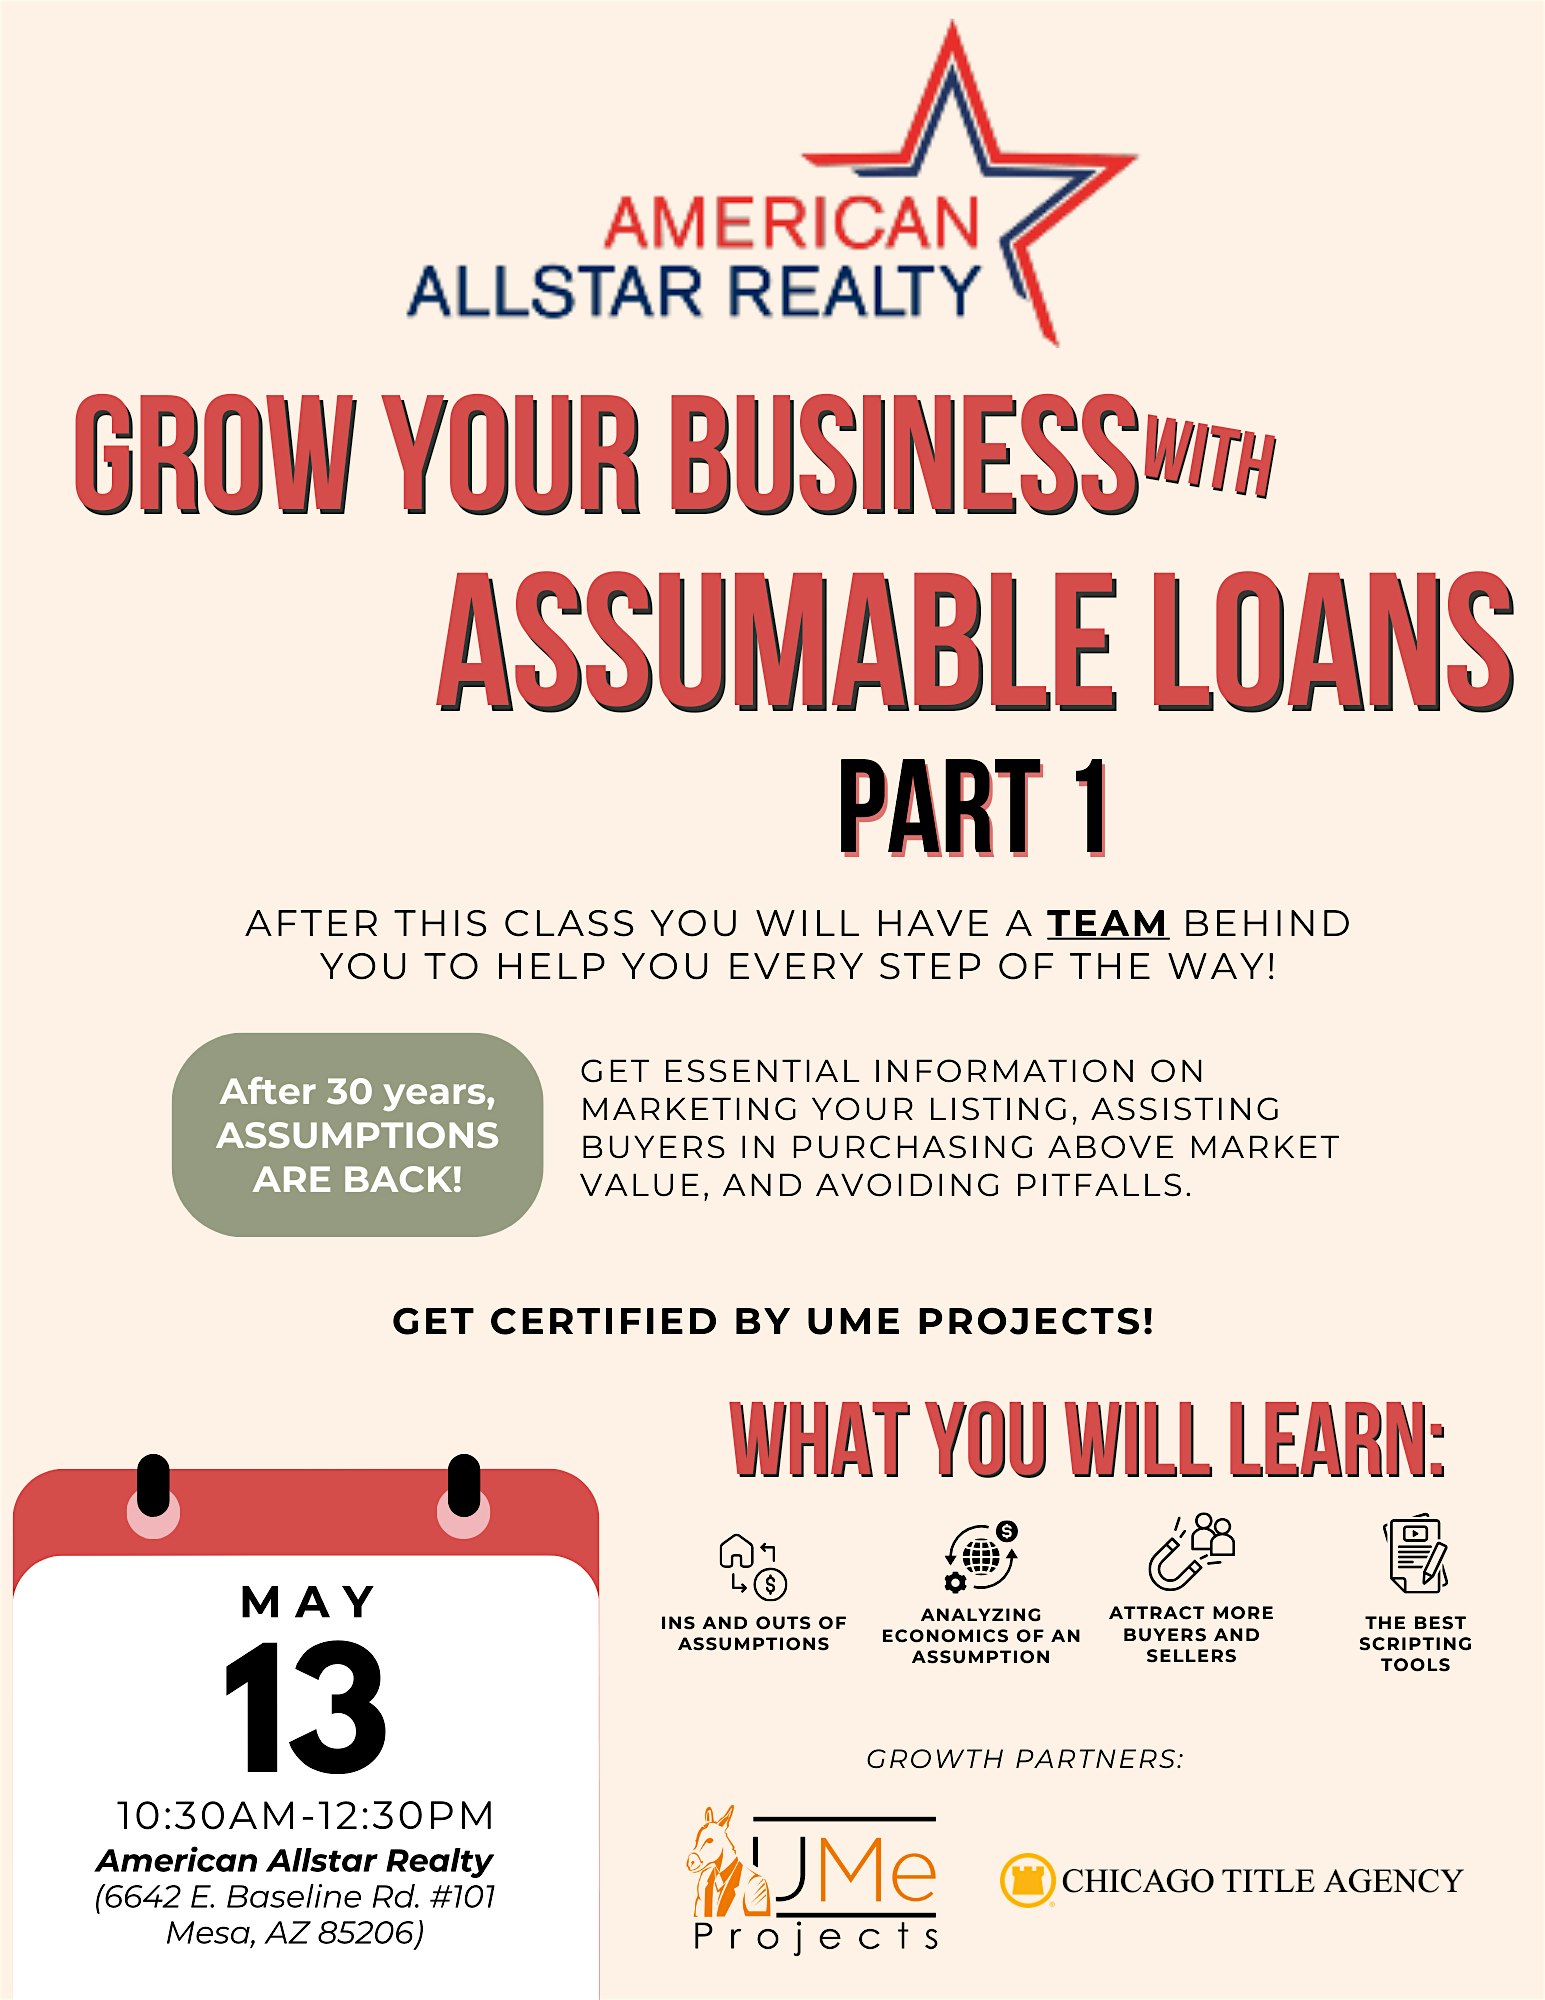 American Allstar Realty: Part 1 - Leverage Assumptions in Real Estate